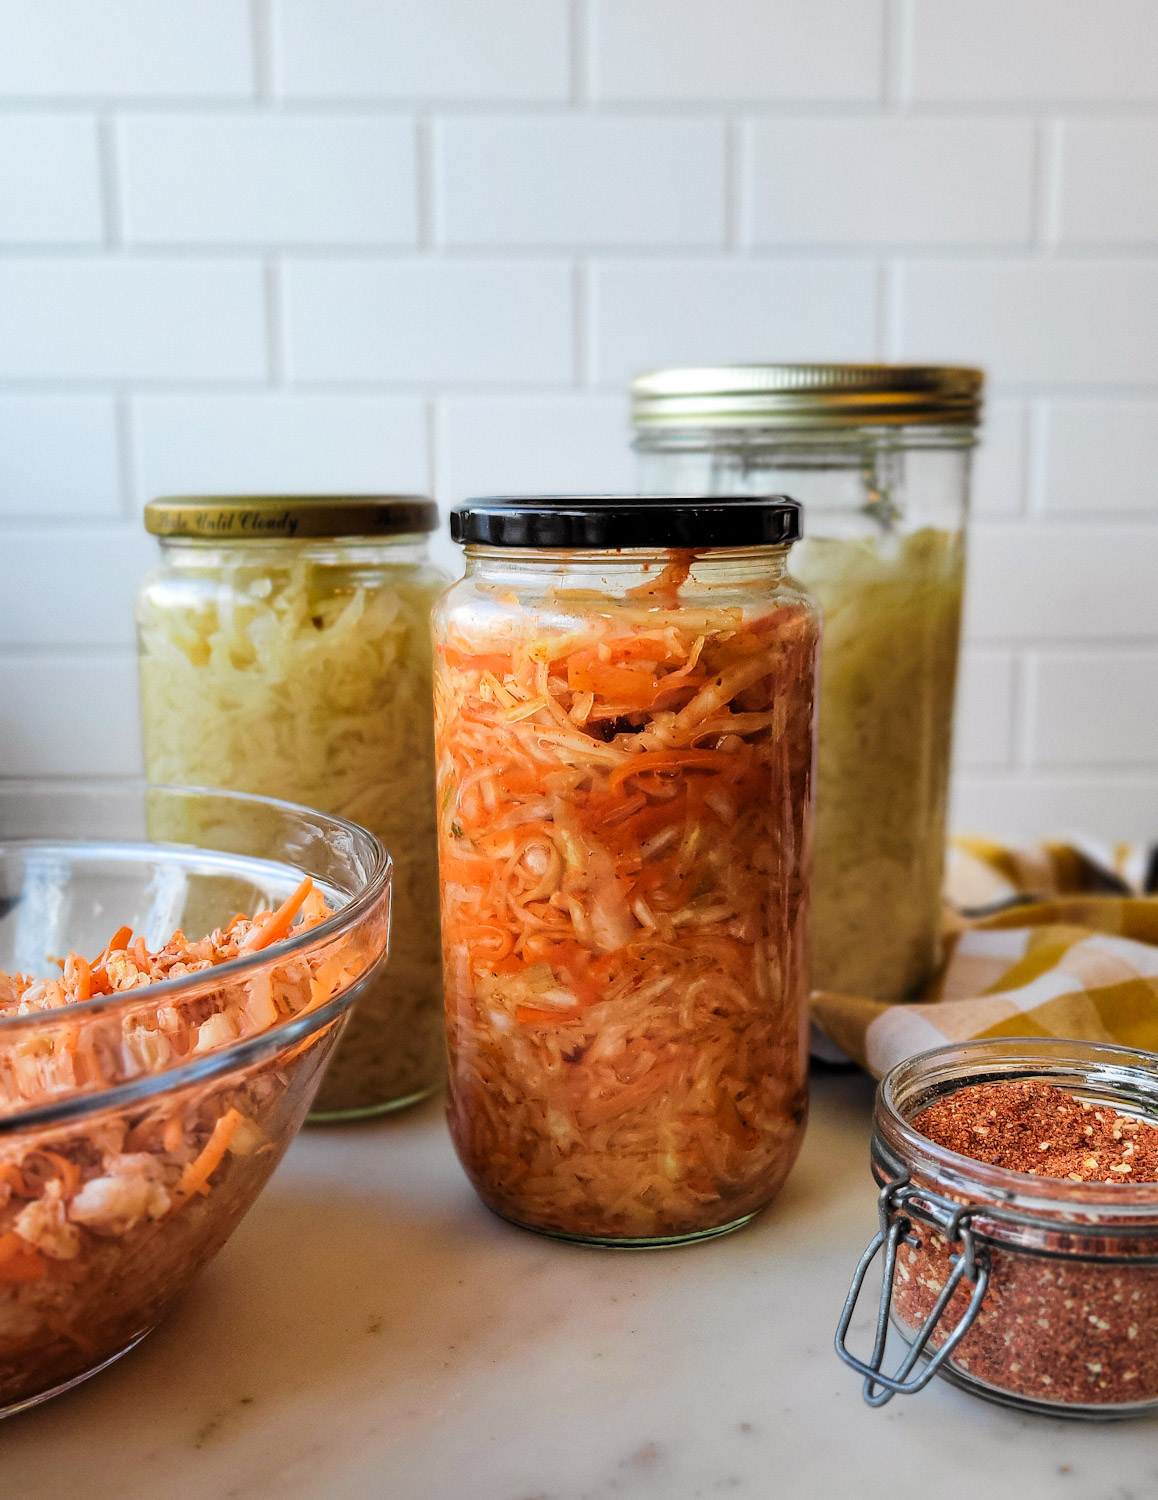 Jars of Sauerkraut and Kimchi on the counter, along with the kimchi spice blend in a jar beside them.